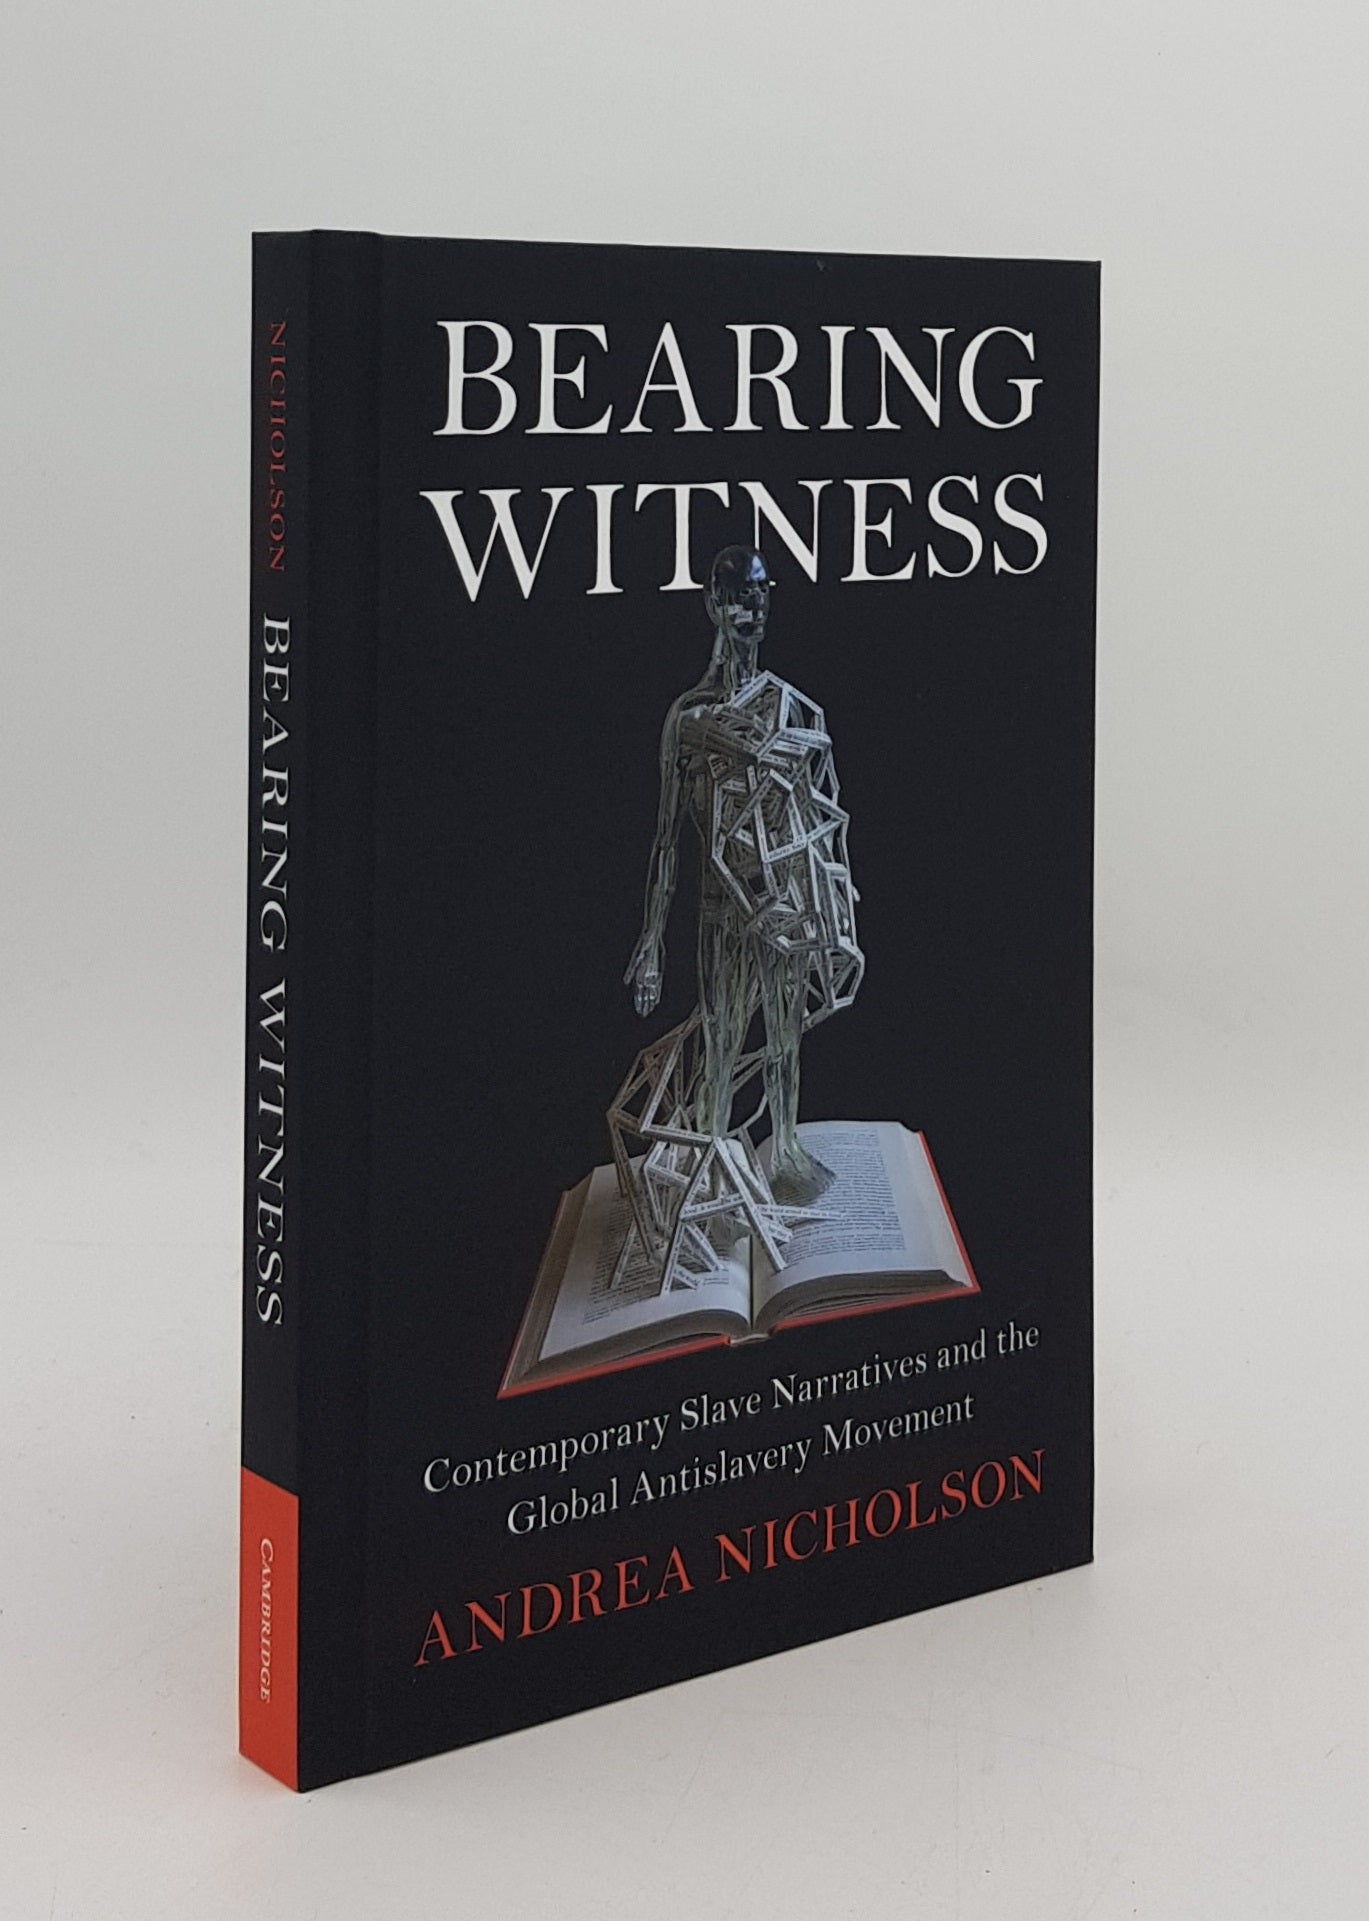 NICHOLSON Andrea - Bearing Witness Contemporary Slave Narratives and the Global Antislavery Movement